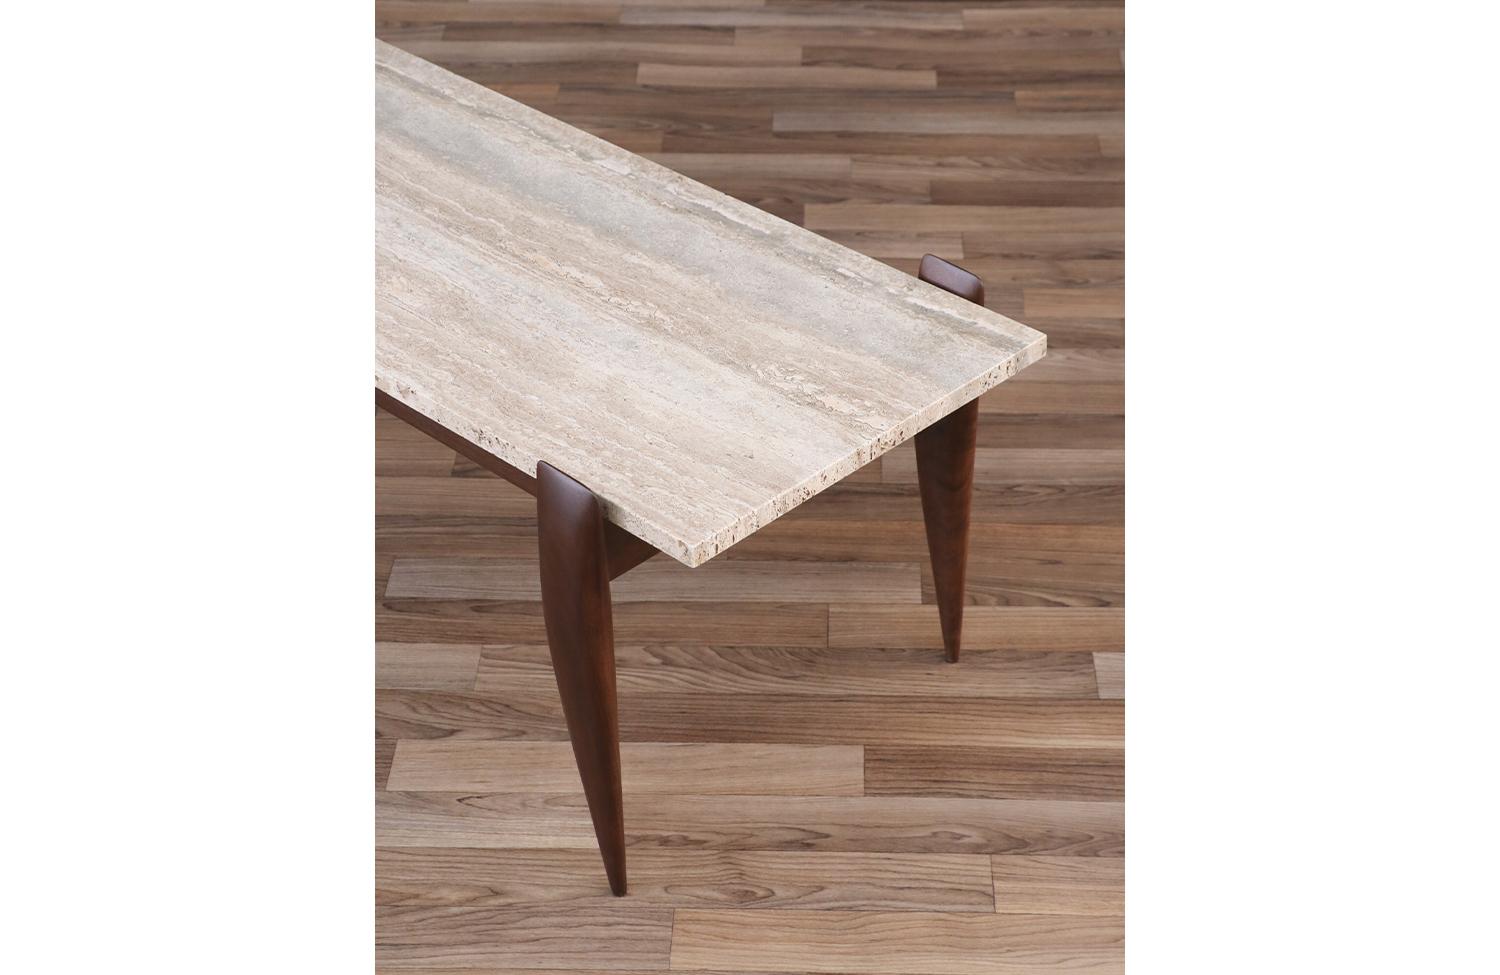 Mid-20th Century Expertly Restored - Gio Ponti Sculpted Walnut & Travertine Coffee Table For Sale